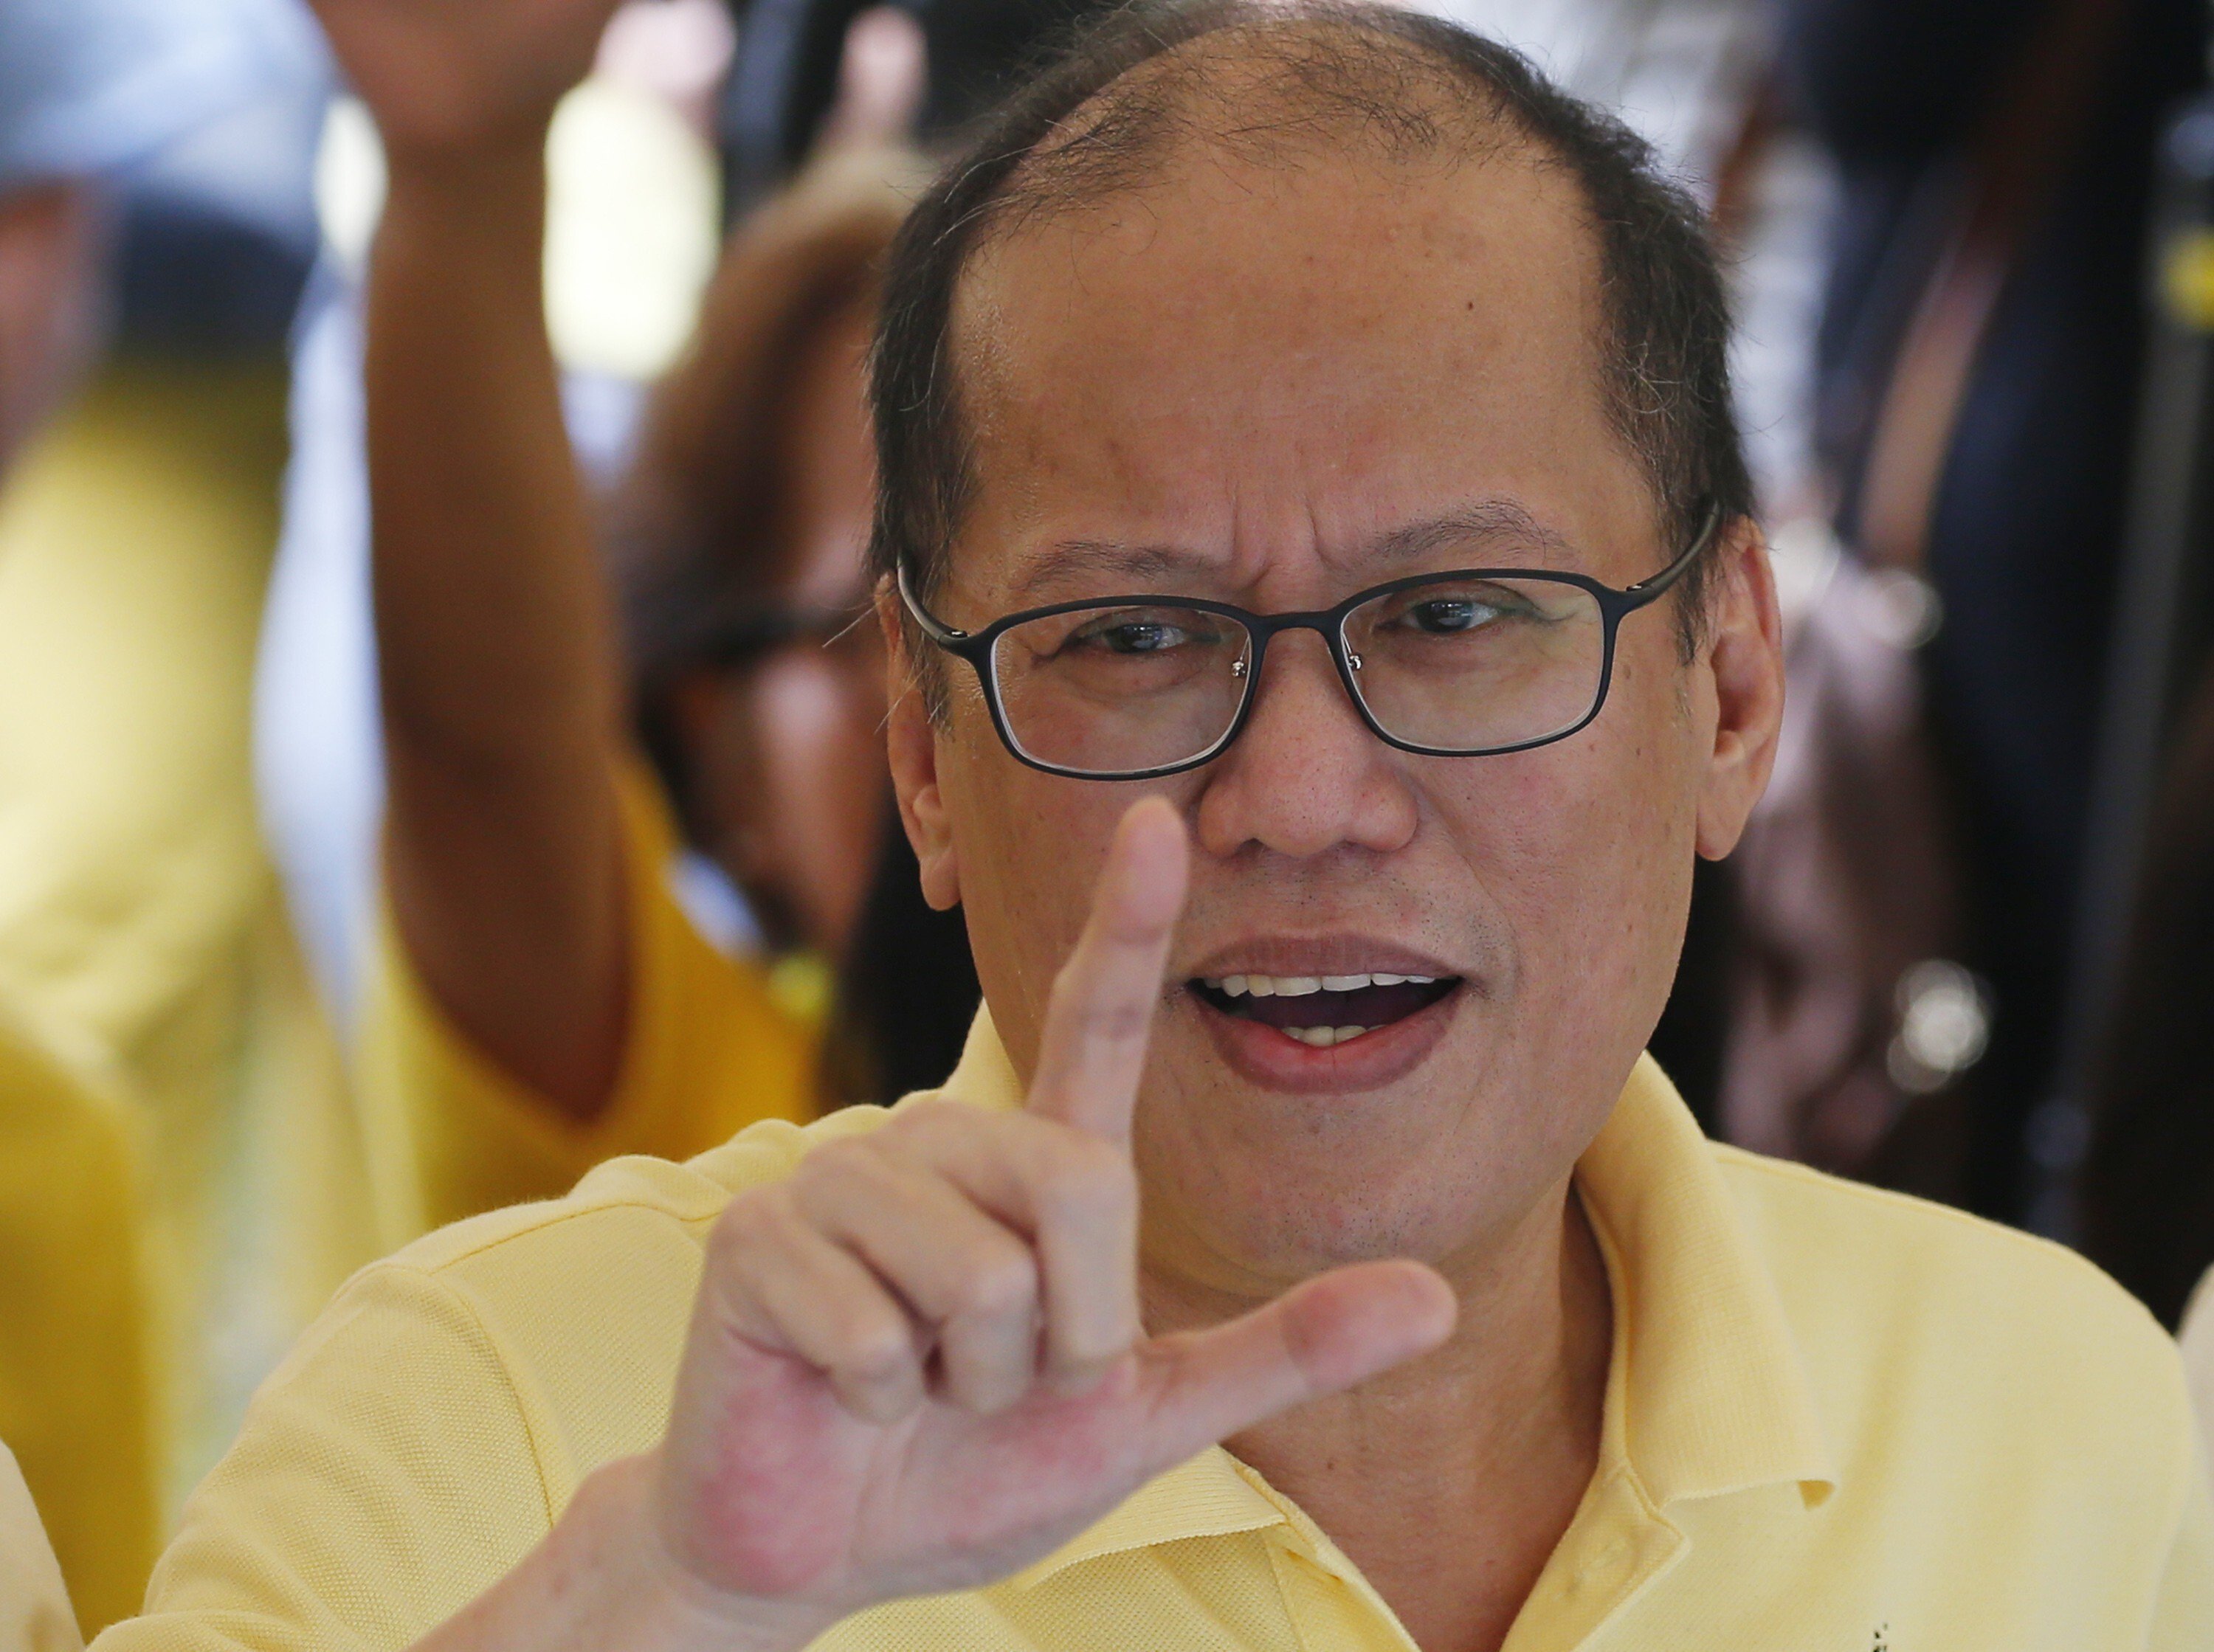 Former Philippine president Benigno Aquino III flashes the ‘L’ sign meaning “Fight!” as he leads a 2018 commemoration of the assassination of his father. Aquino died on June 24 at the age of 61. Photo: AP